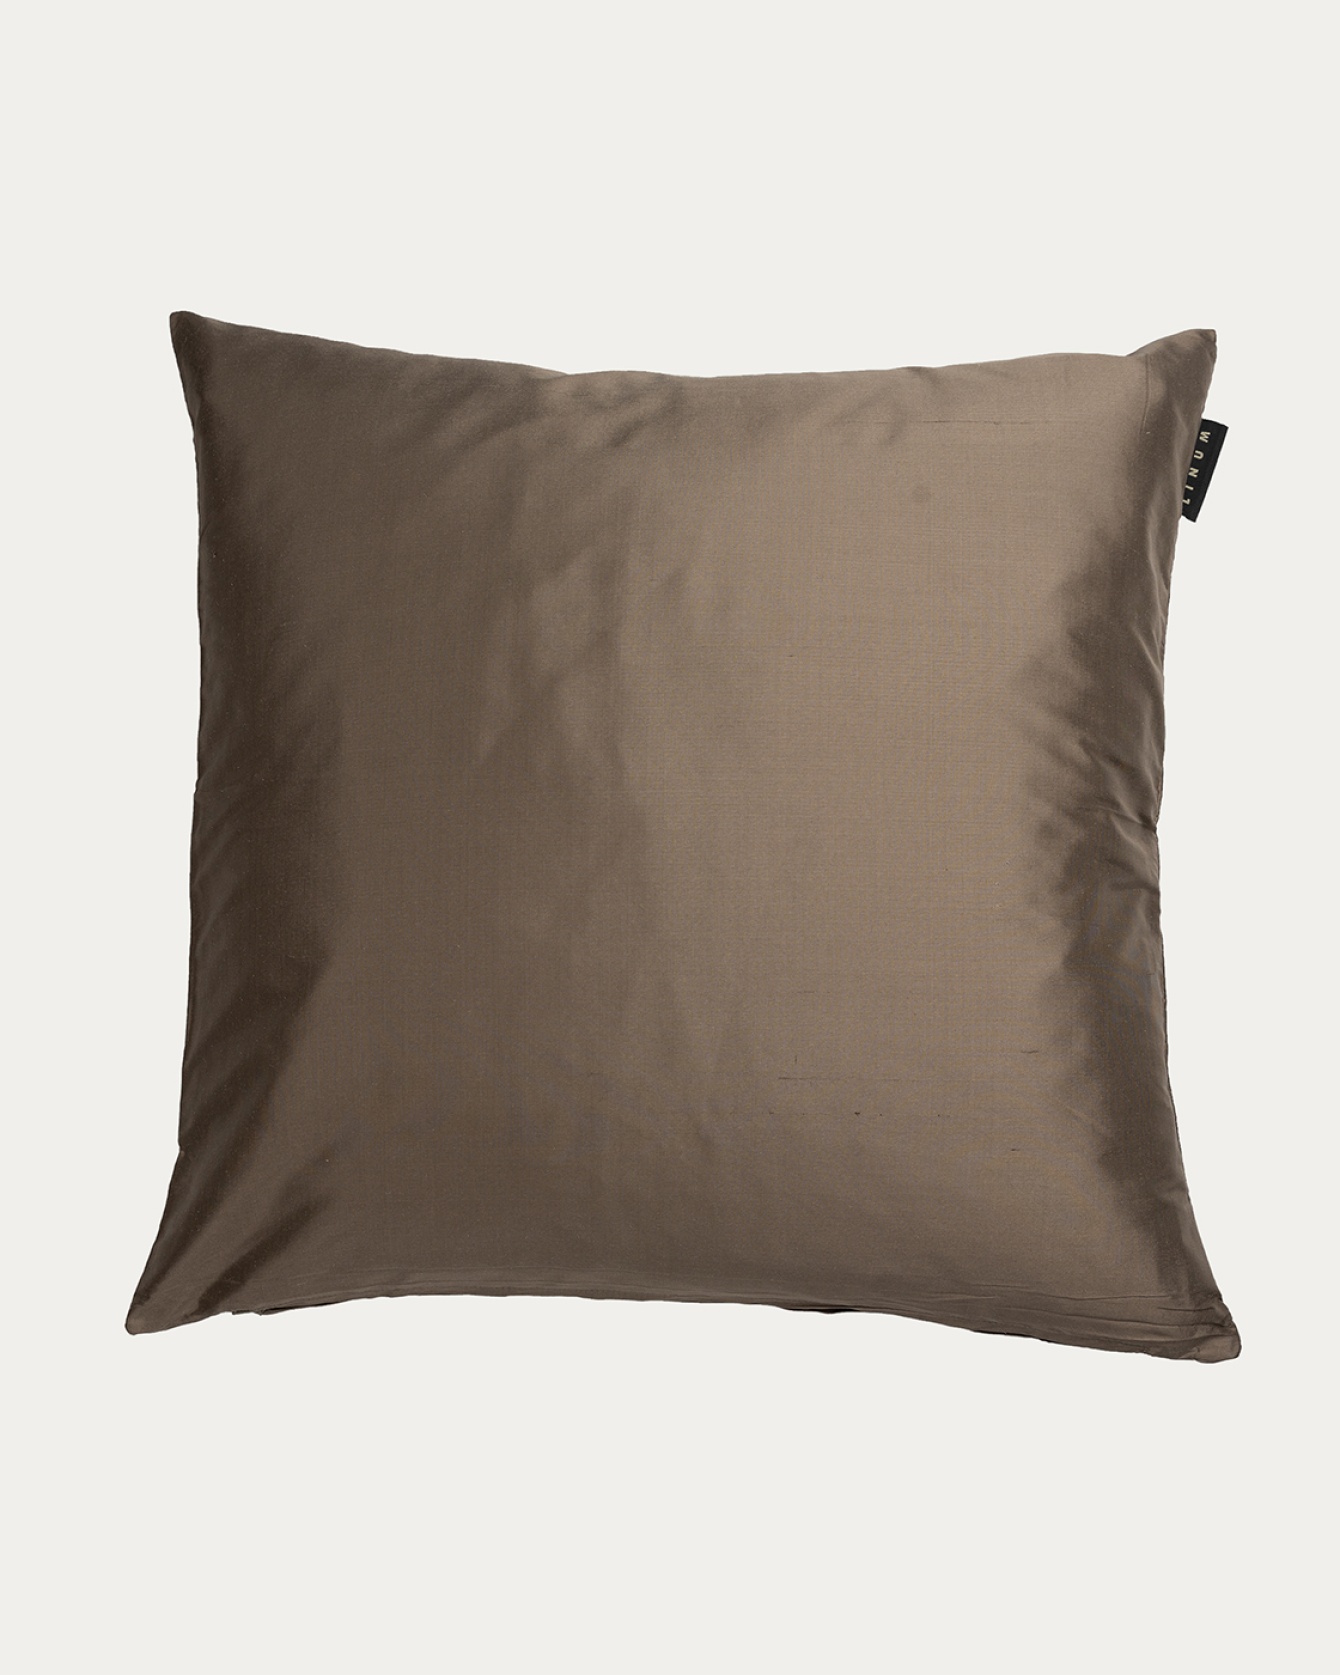 Product image dark mole brown SILK cushion cover made of 100% dupion silk that gives a nice lustre from LINUM DESIGN. Size 50x50 cm.